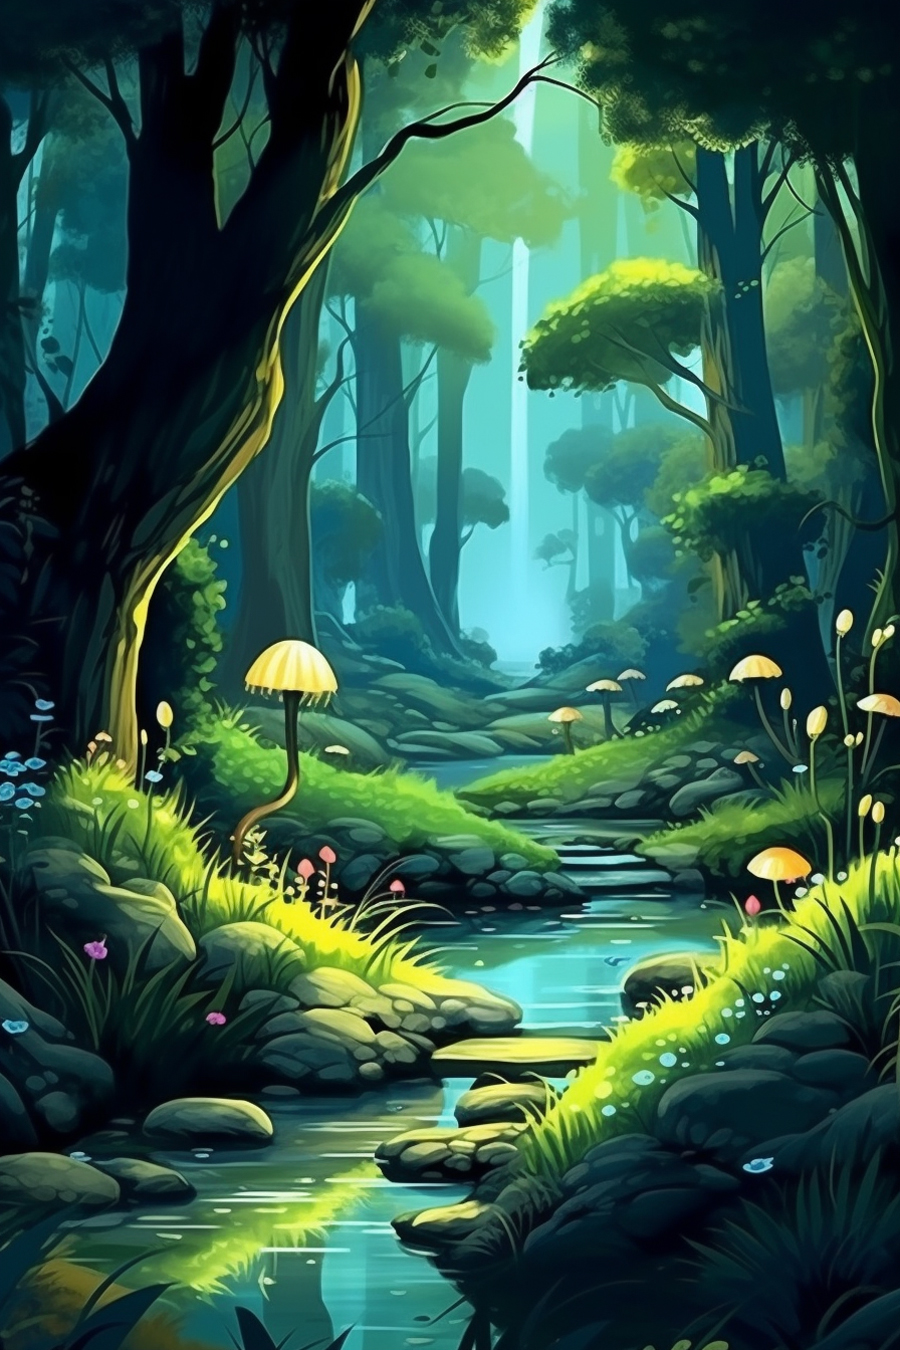 A cartoon forest scene with a stream and trees.